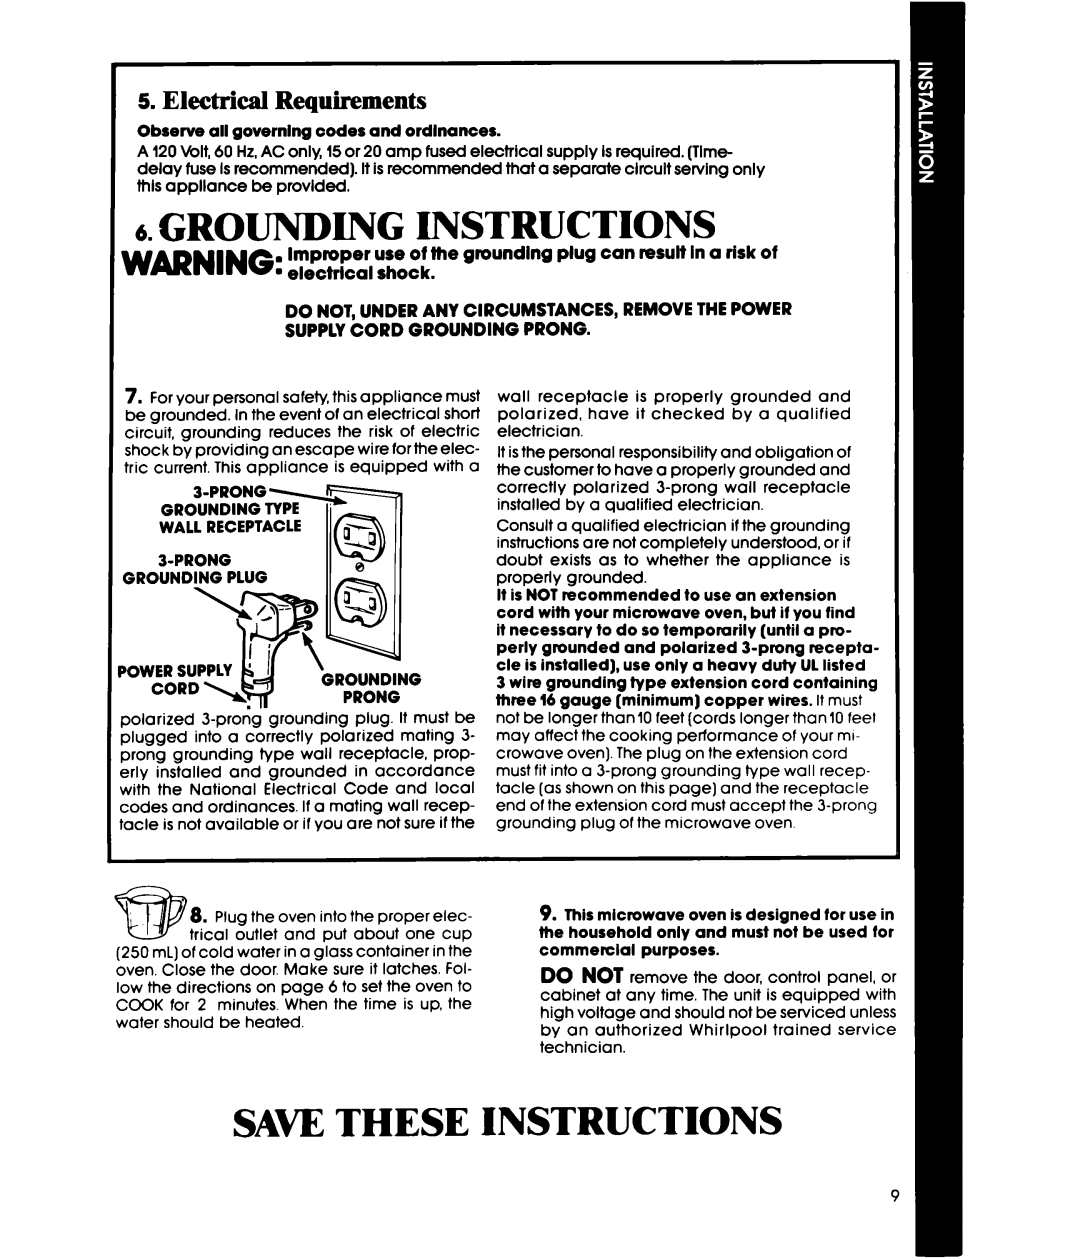 Whirlpool MW32OOXS manual Grounding Instructions, Requirements, Electrical, Saw These Instructions 